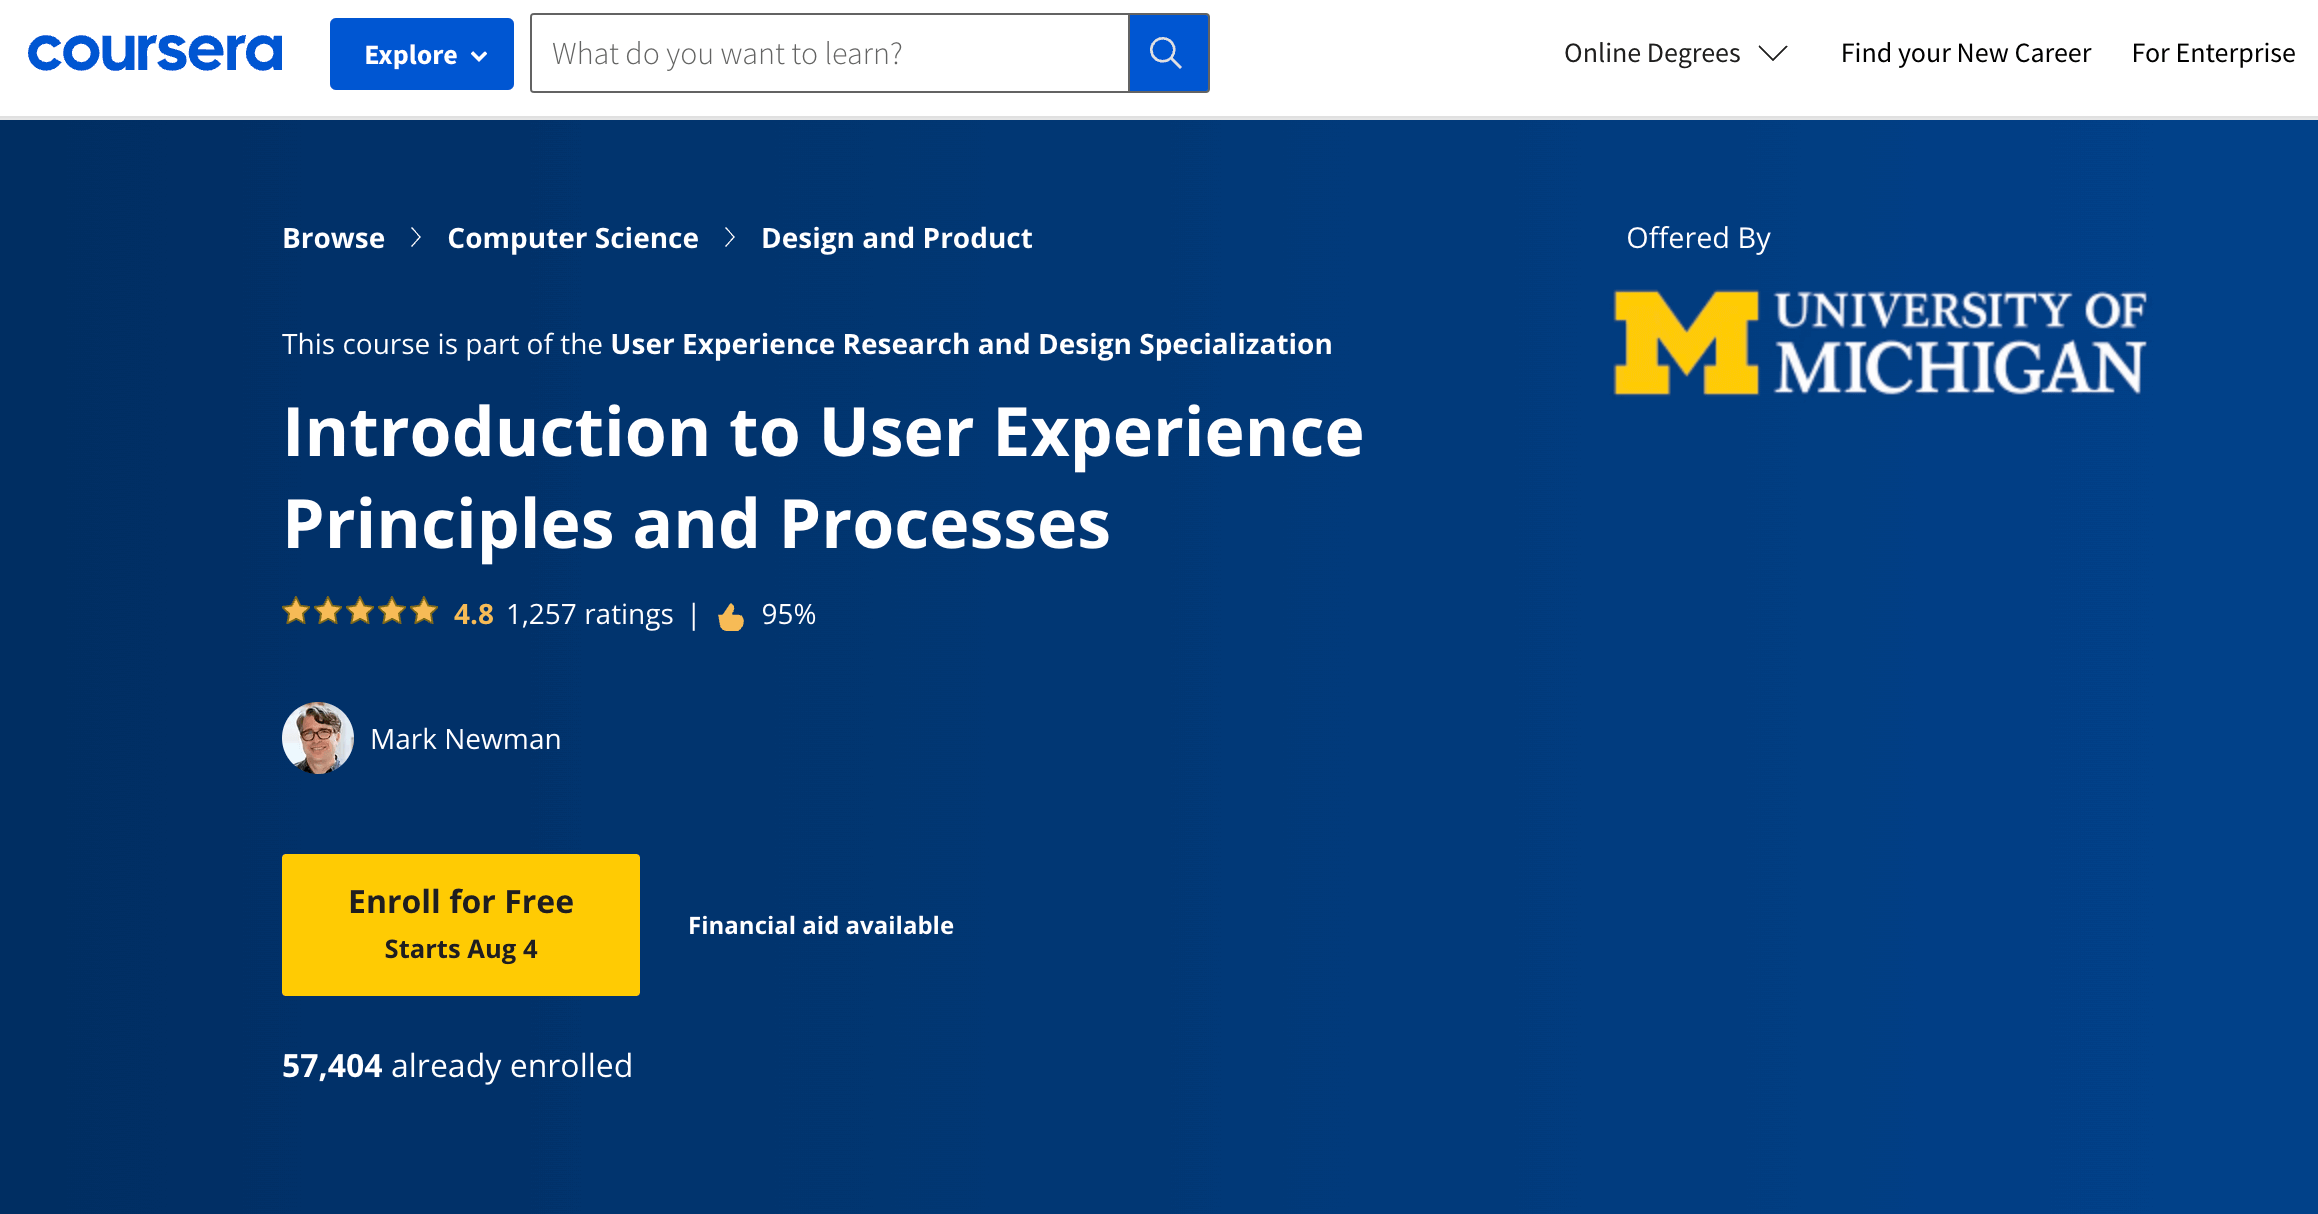 University of Michigan’s Introduction to User Experience Principles and Processes on Coursera